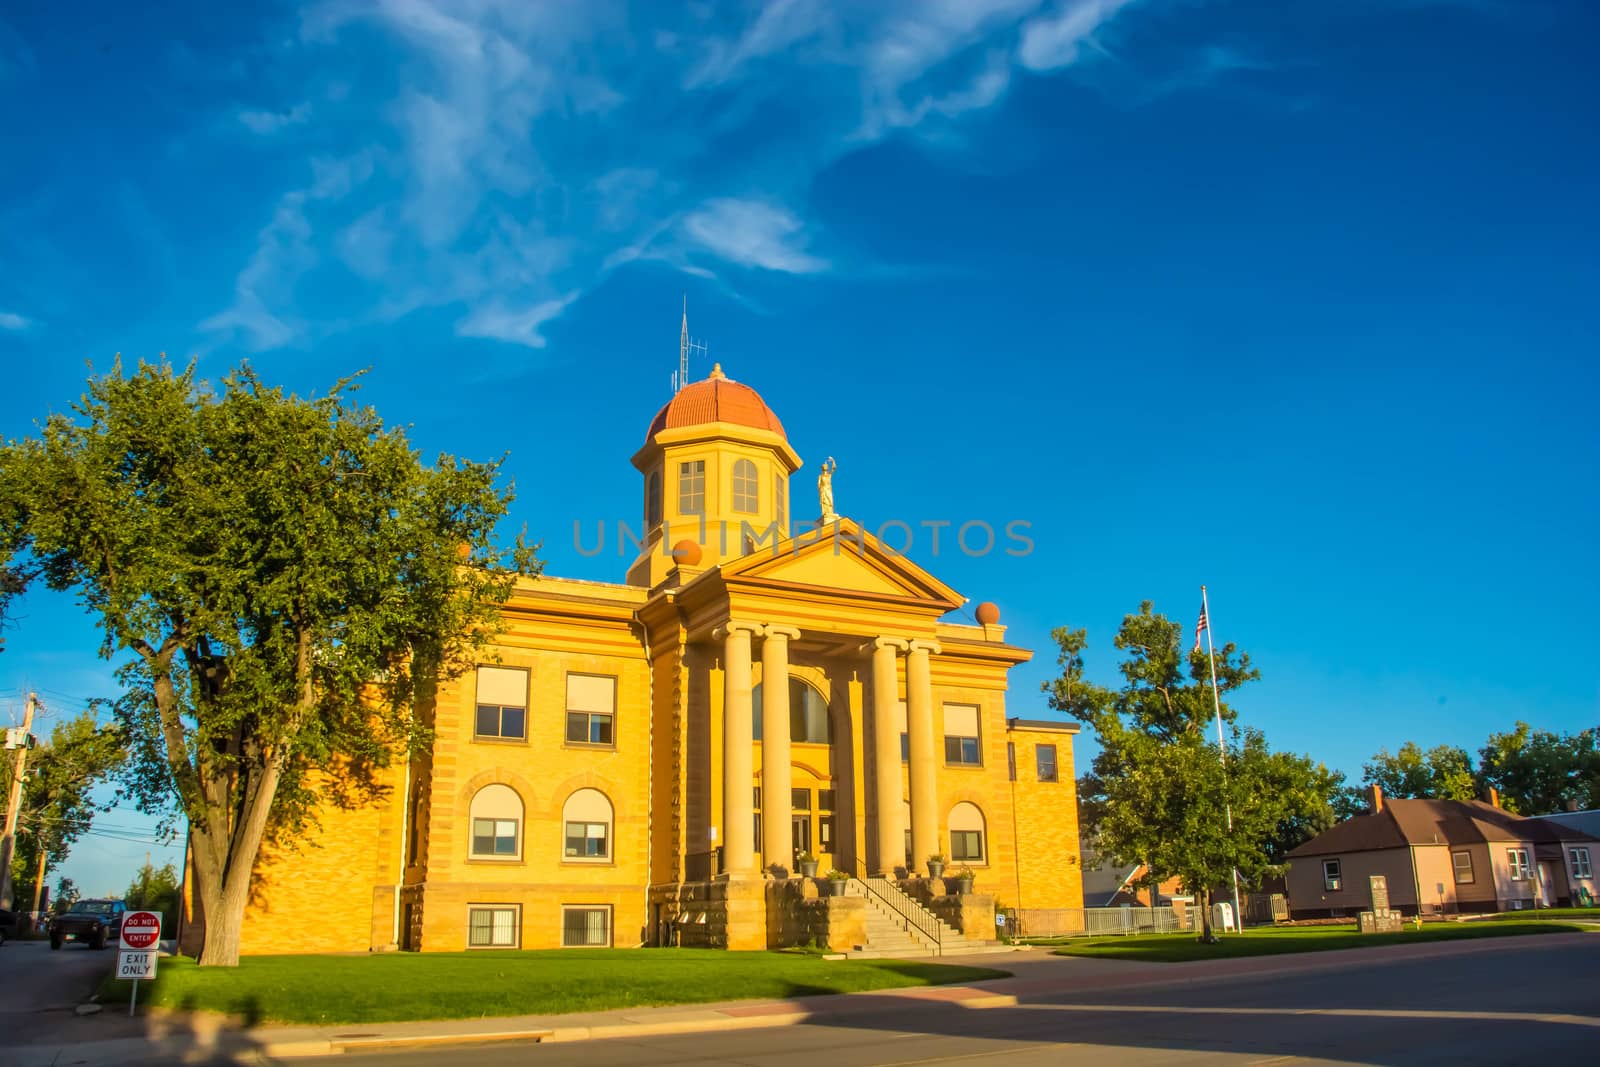 Historic City Hall in Downtown Belle Fourche, South Dakota by cestes001